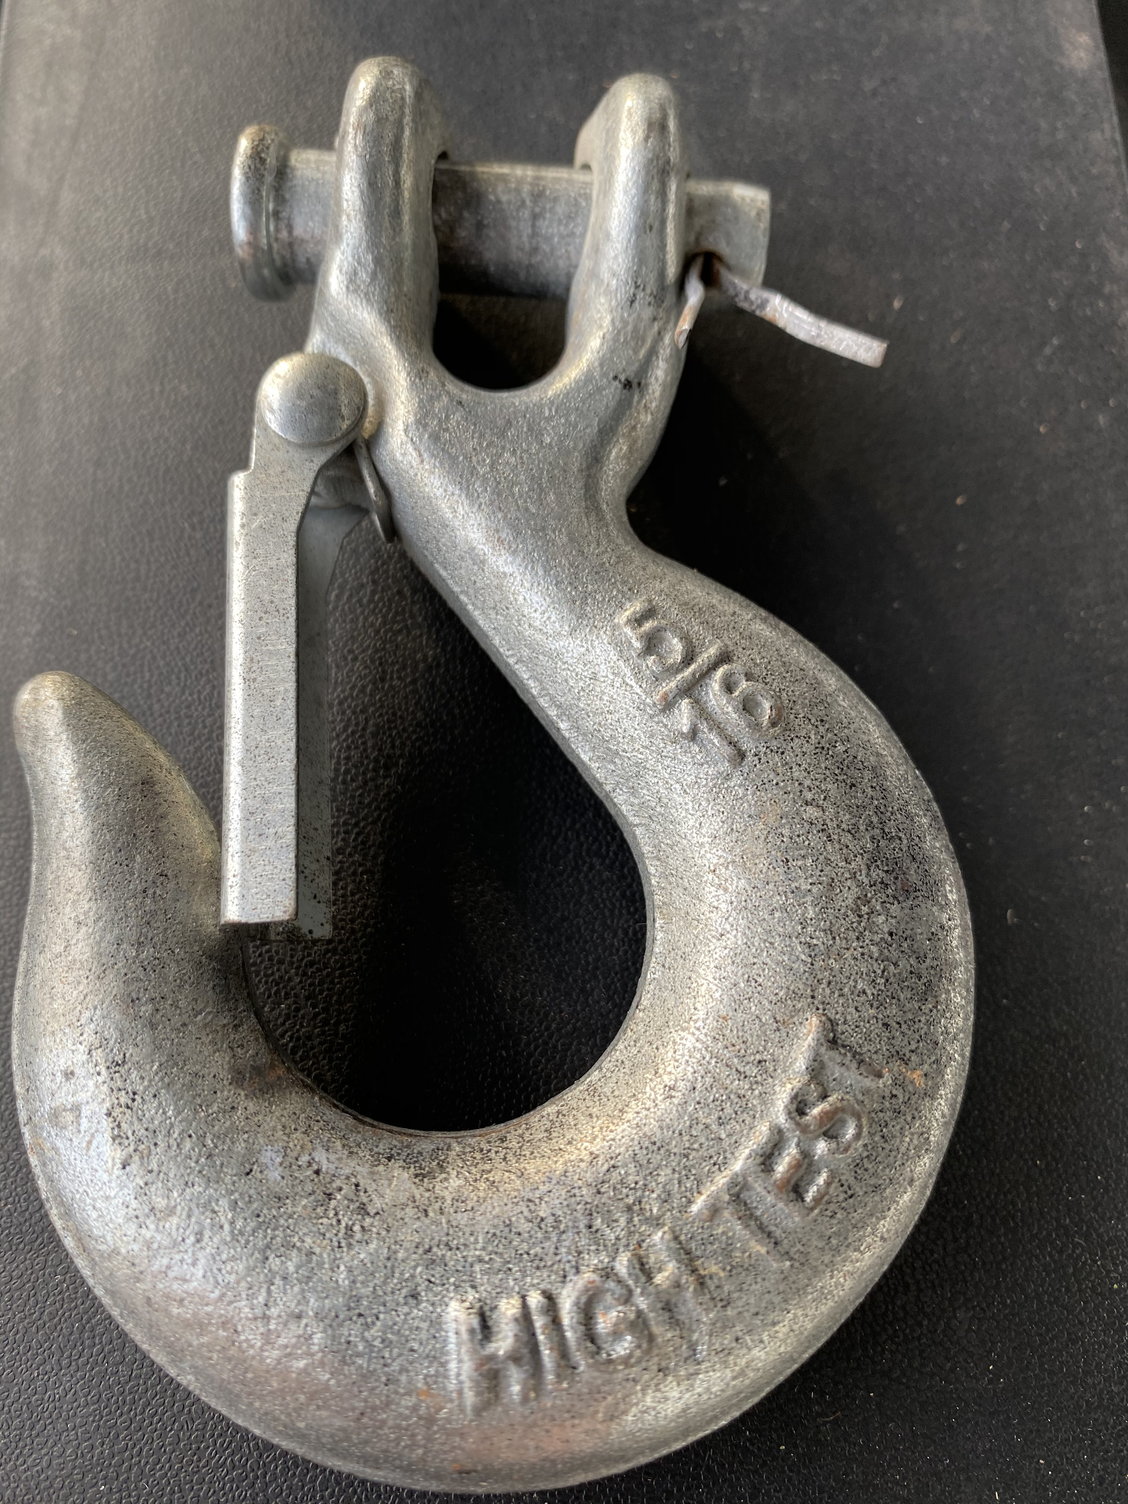 Tow-Chain clevis hooks don't fit 2020 f25 - Ford Truck Enthusiasts Forums